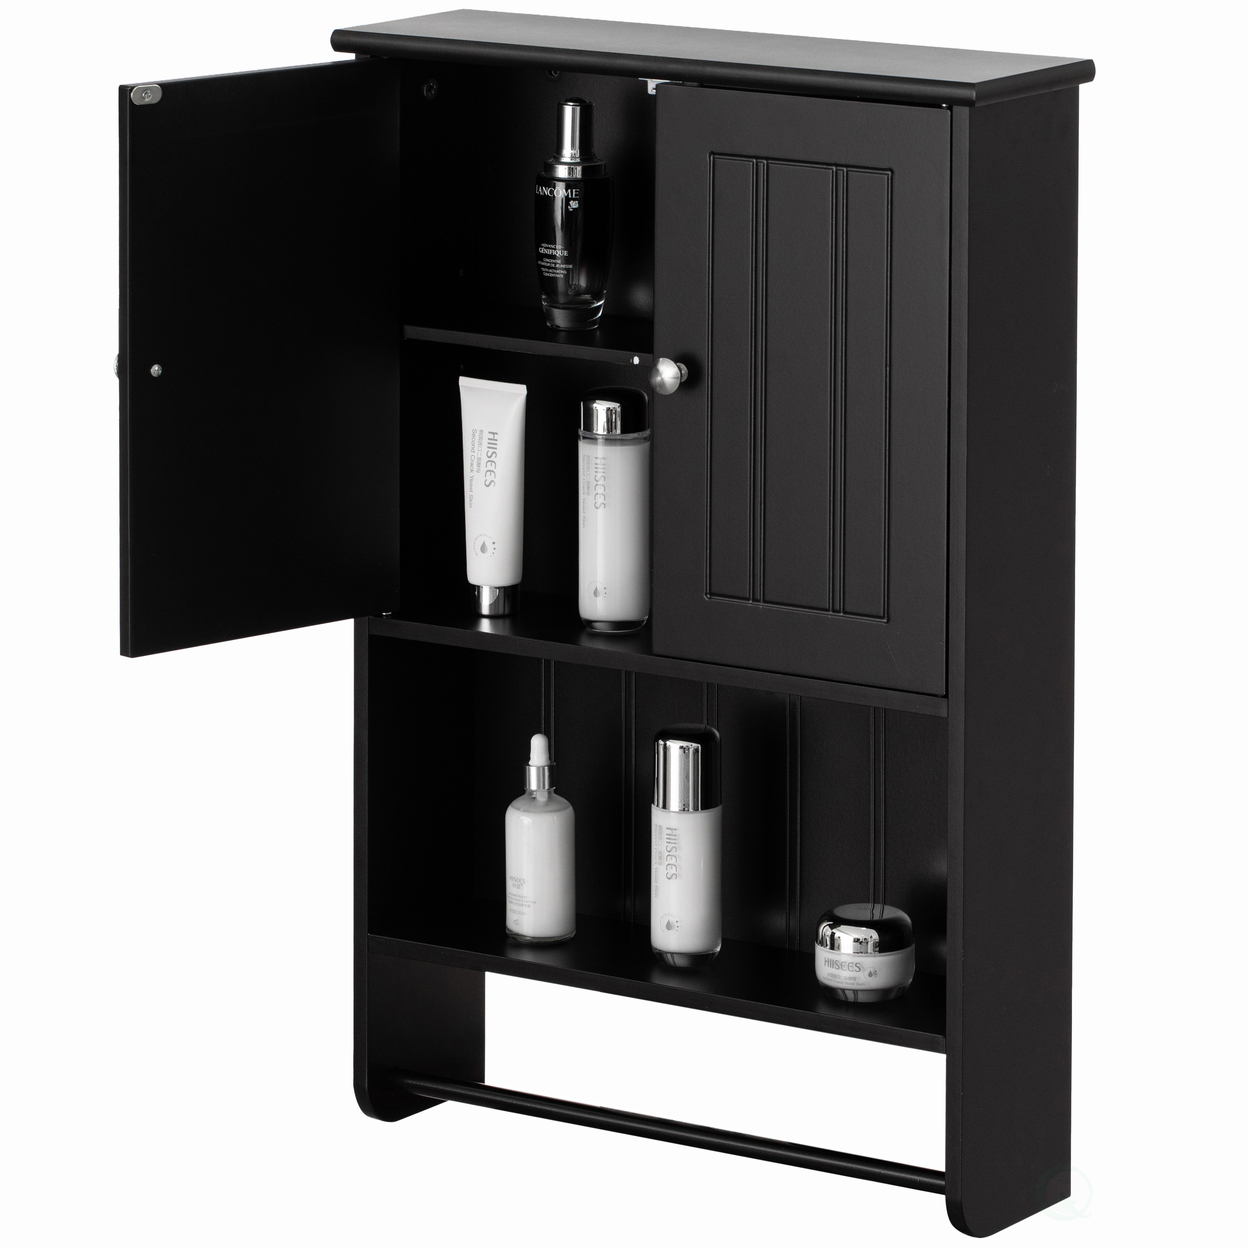 Wall Mount Bathroom Cabinet Wooden Medicine Cabinet Storage Organizer Double Door With 2 Shelves, And Open Display Shelf, With Towel Bar - B